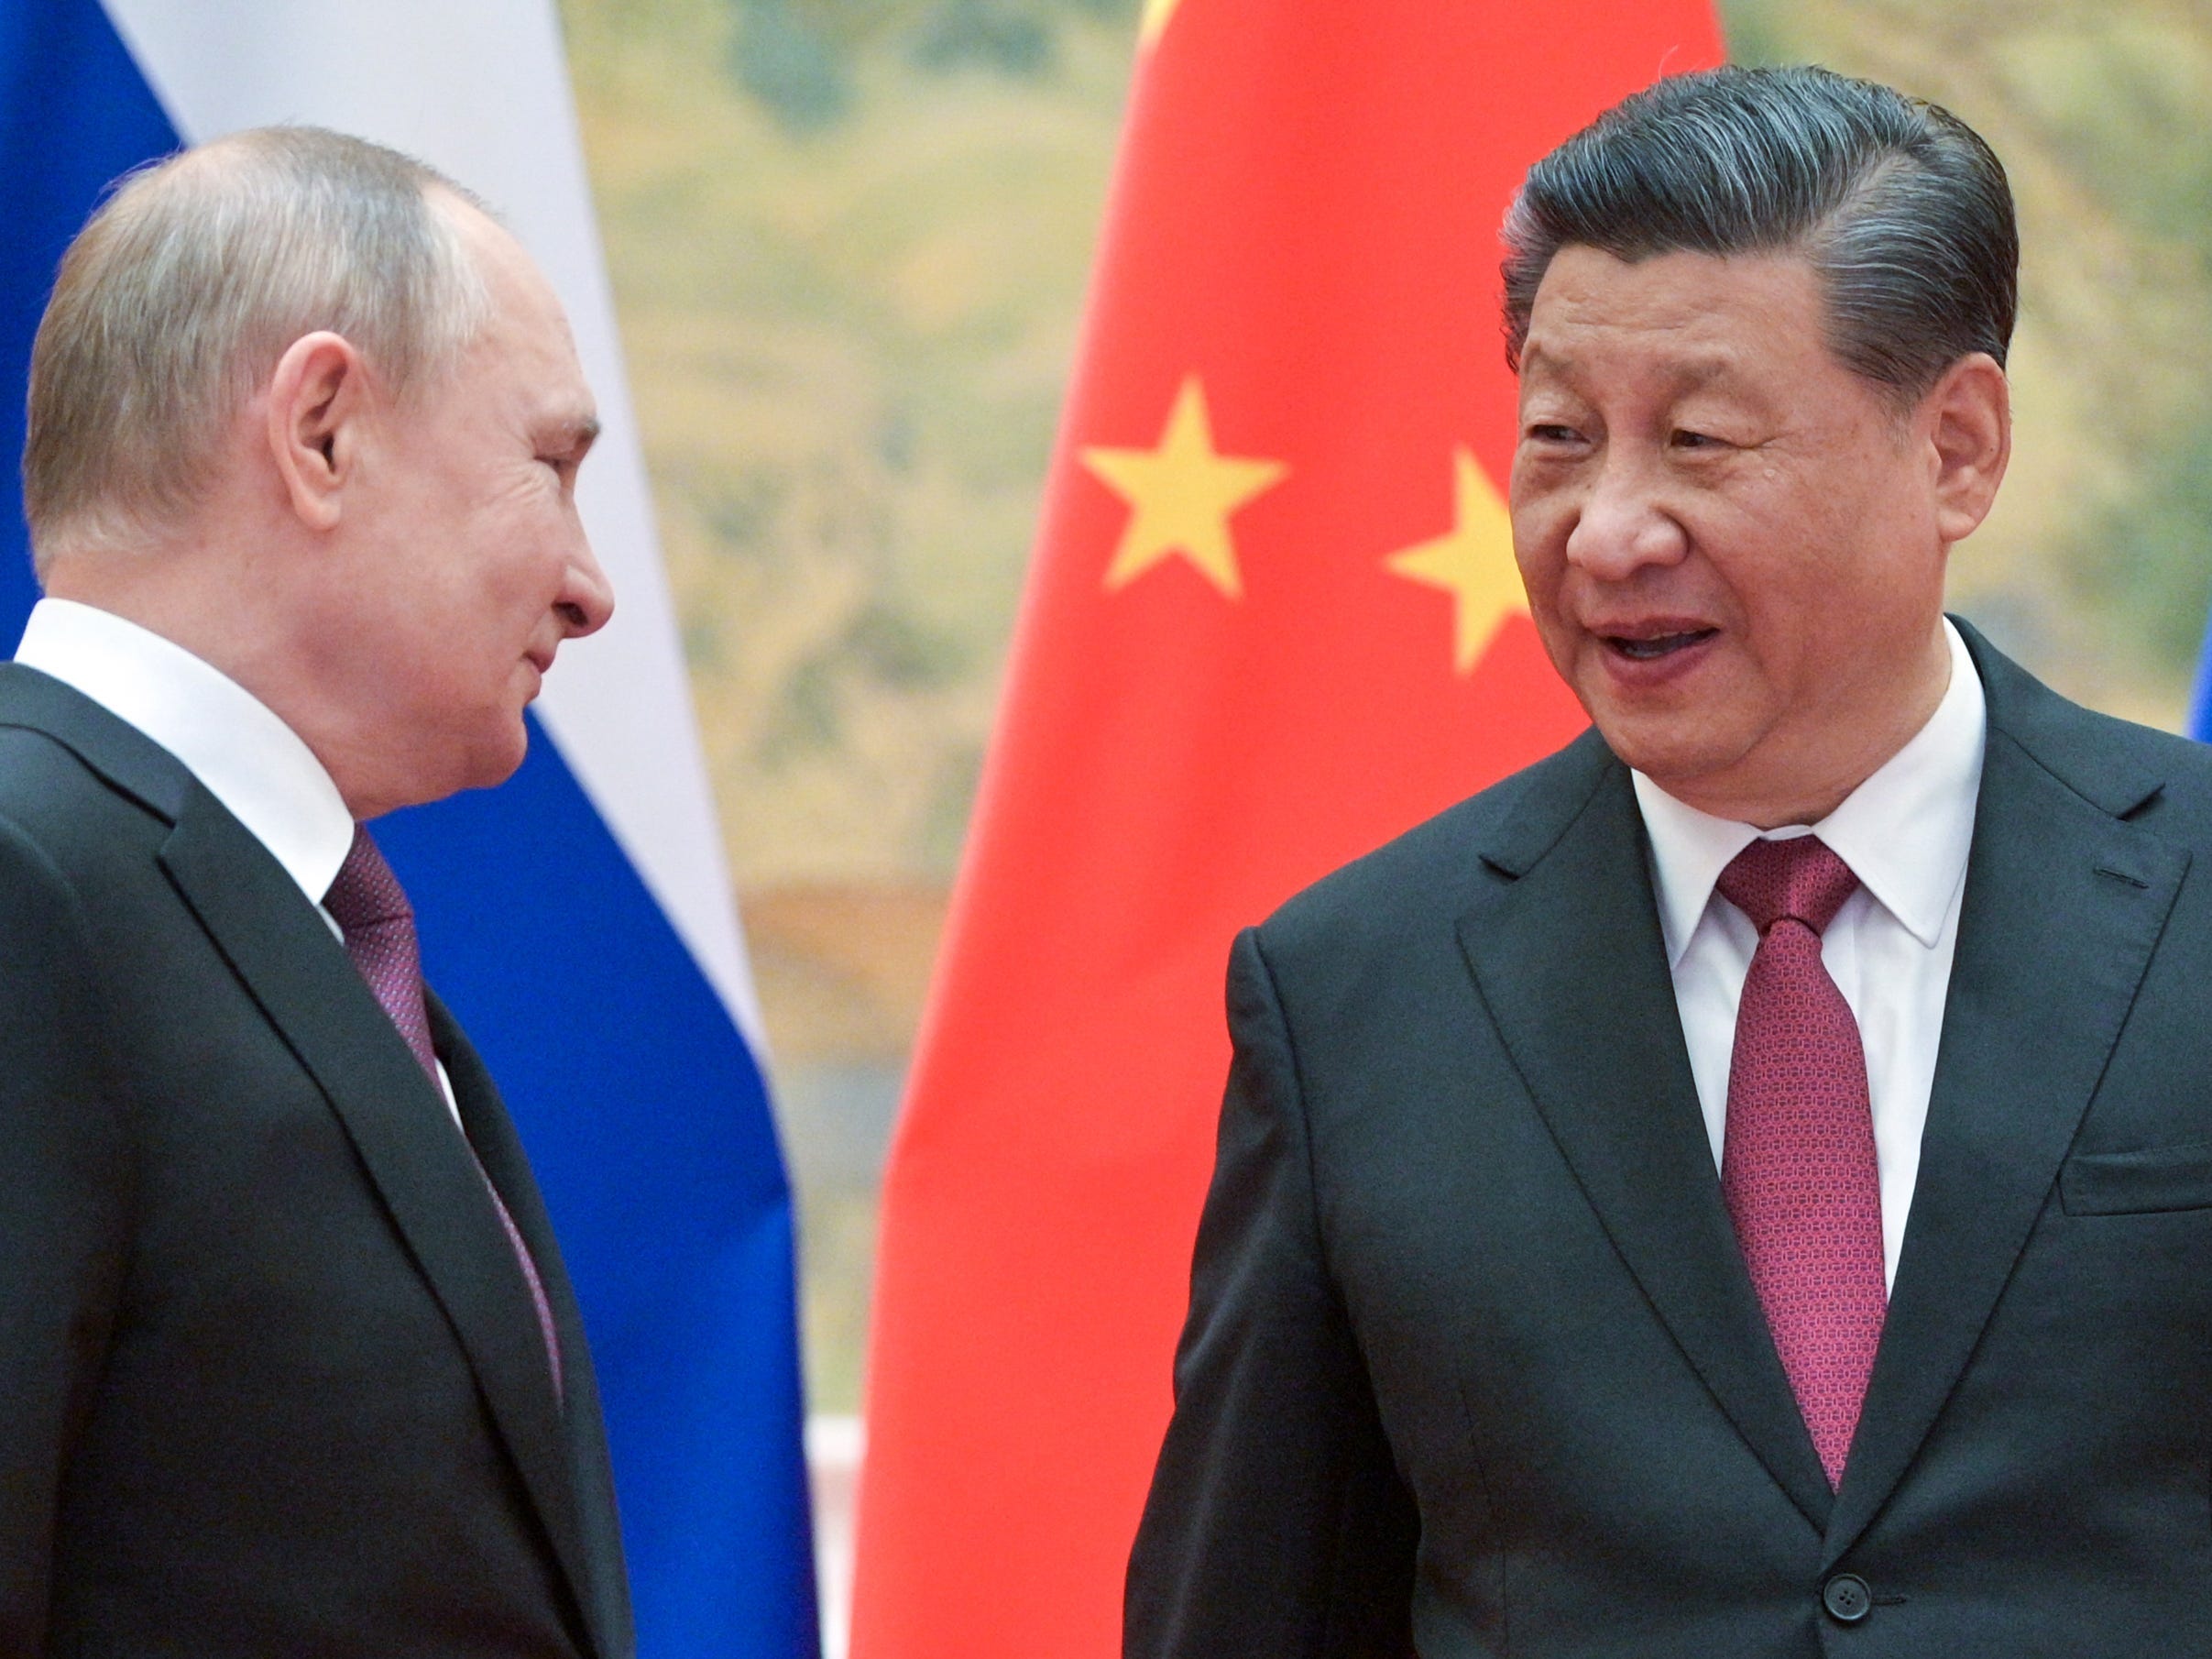 Russia's President Vladimir Putin (L) and his Chinese counterpart Xi Jinping pose during a meeting at the Diaoyutai State Guesthouse.